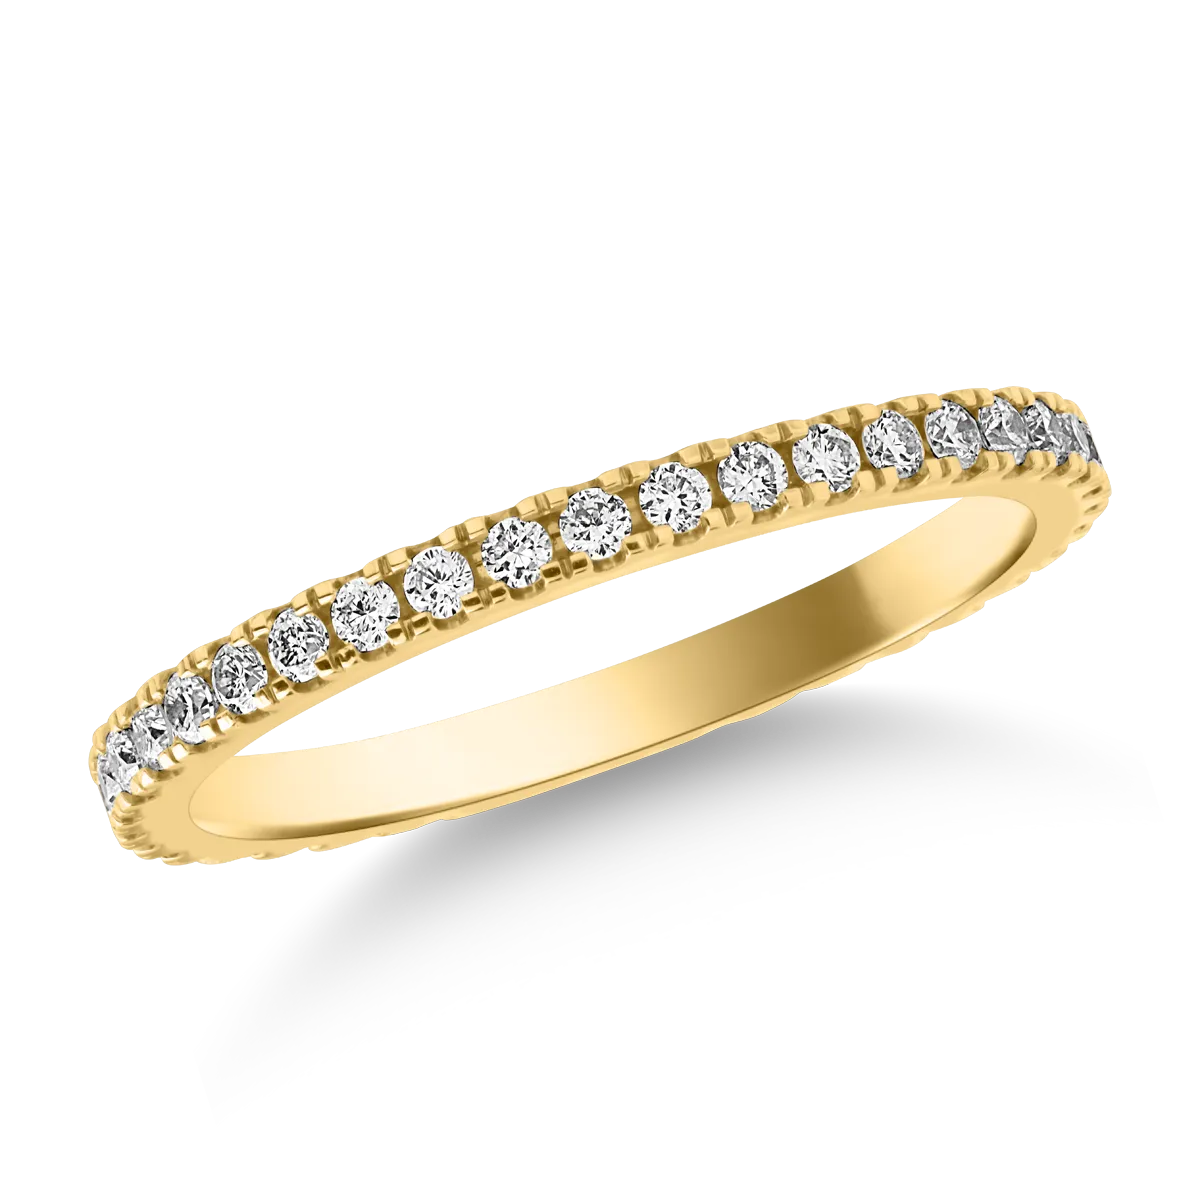 Eternity ring in yellow gold with 0.33ct diamonds